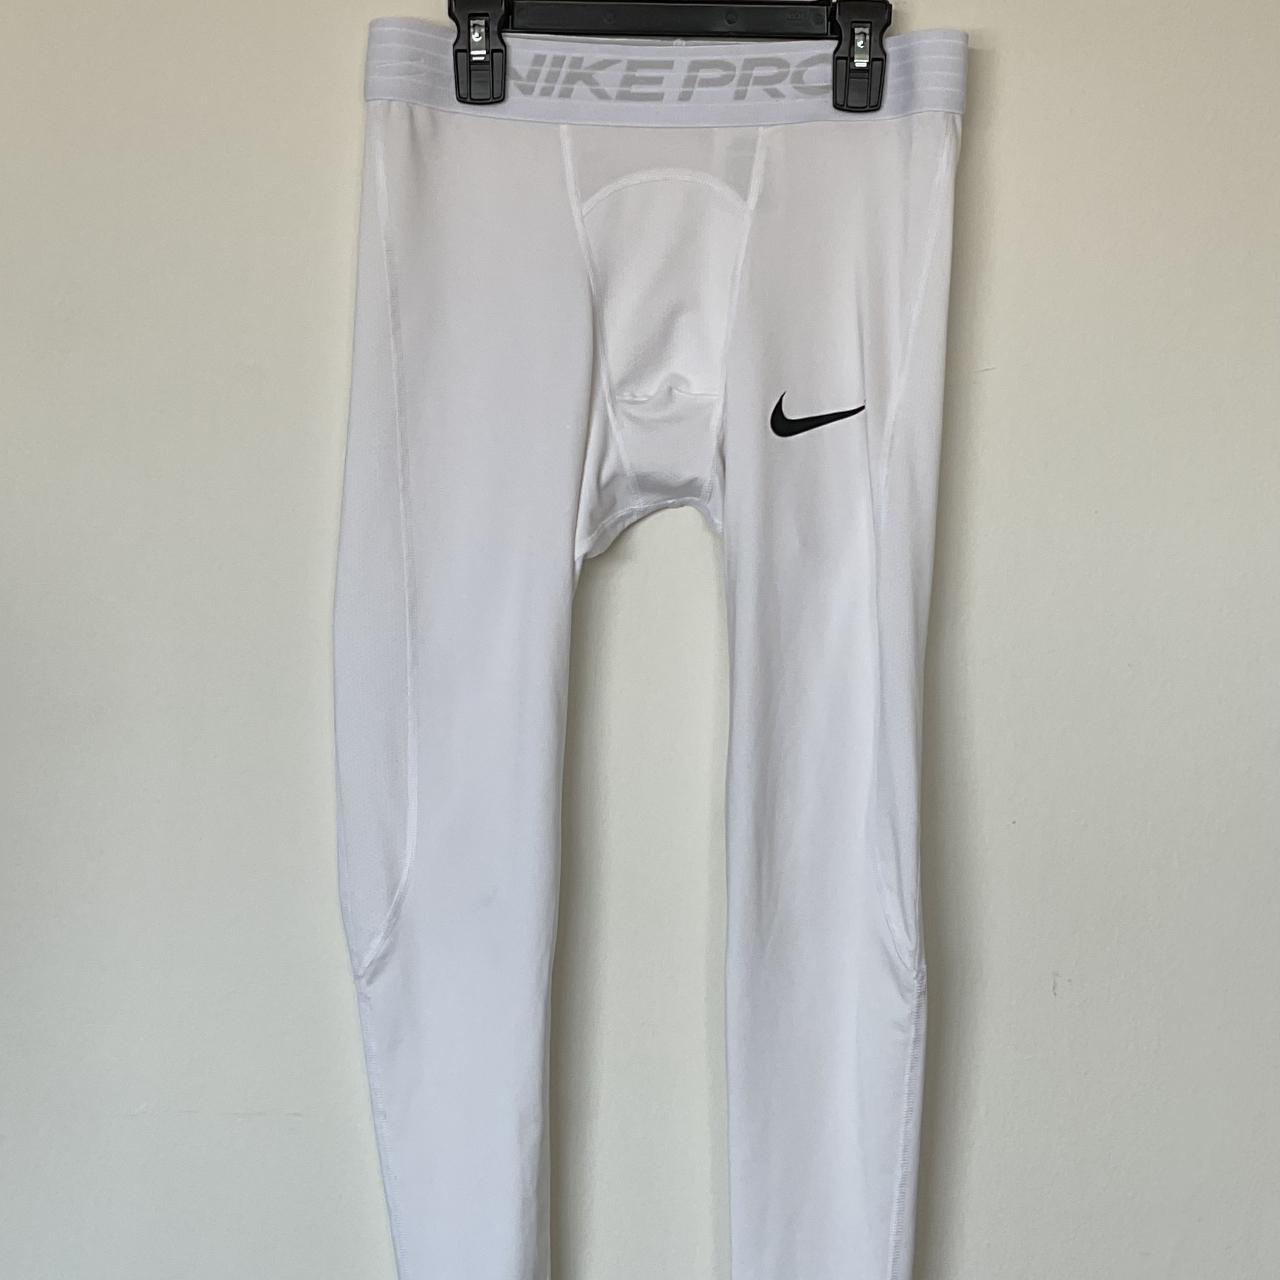 Nike Pro Mens Tight Fit Compression Tights Heather - Depop